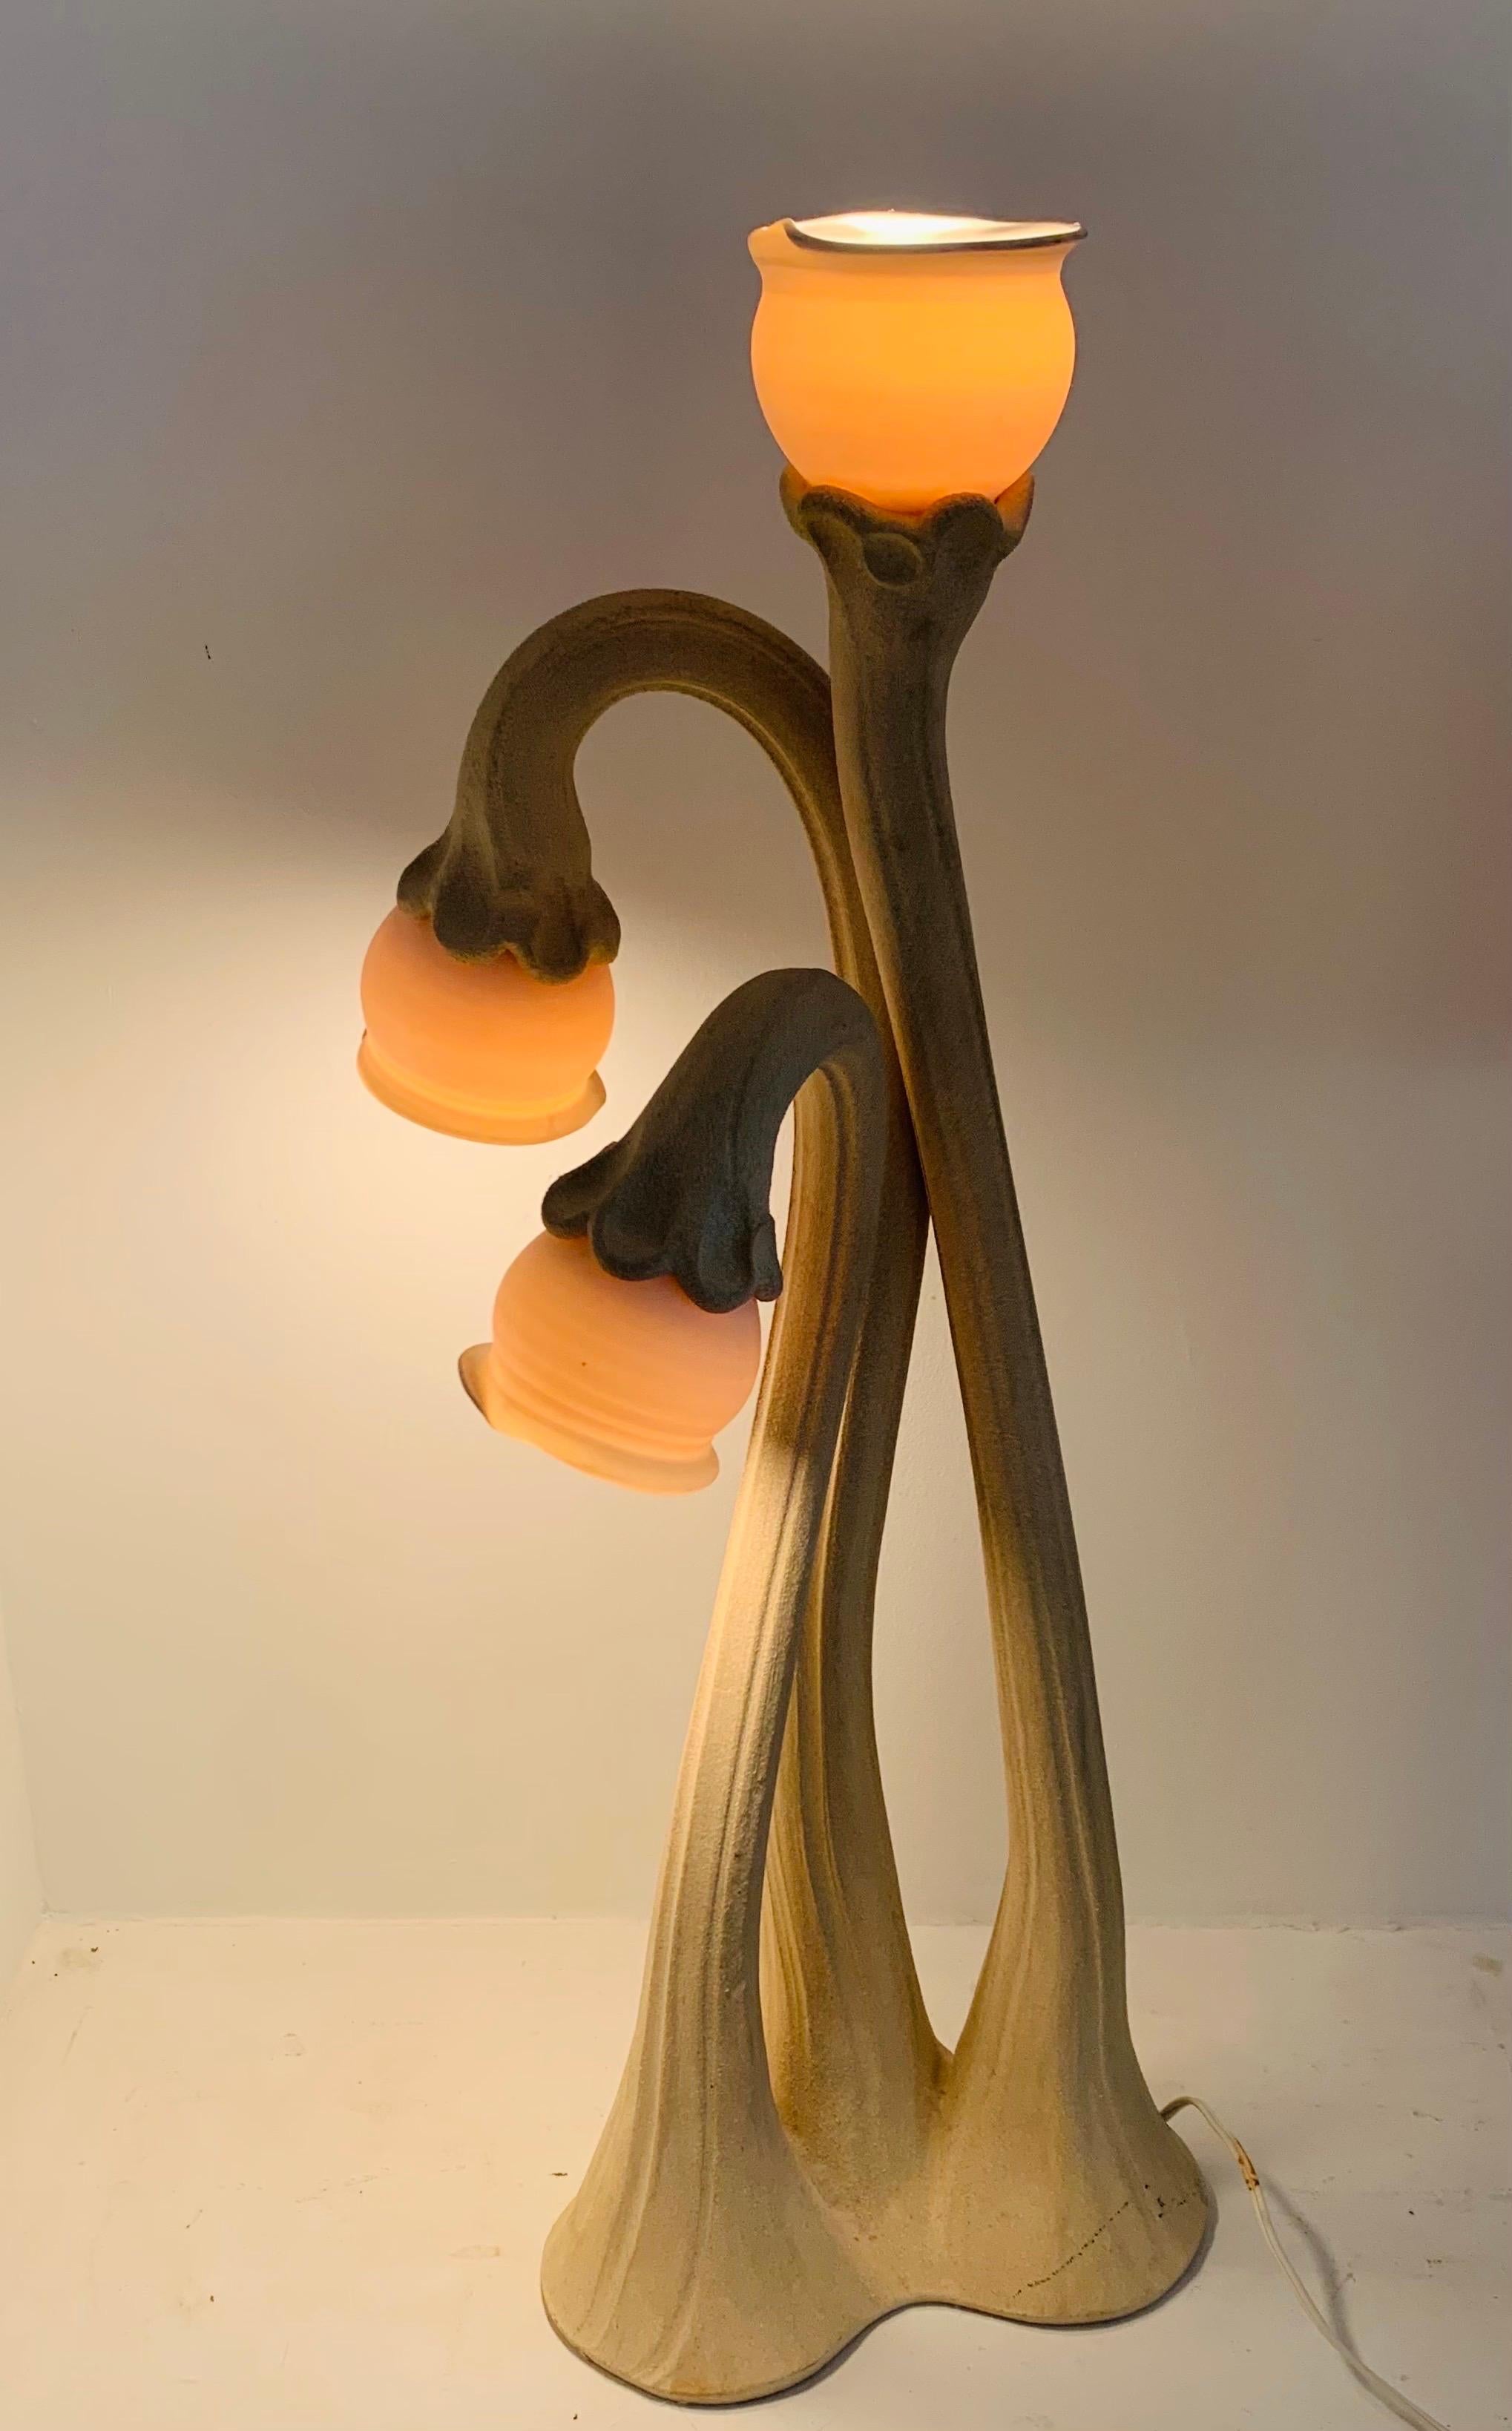 A rare 3-stem handmade Calla Lilly lamp by Doug Blum, circa 1980.

Standing 32” Tall 

Doug Blum is best known for wheel thrown stoneware and porcelain lamps, known as Lily Lamps: the bases are stoneware, the lamp globes are a translucent porcelain